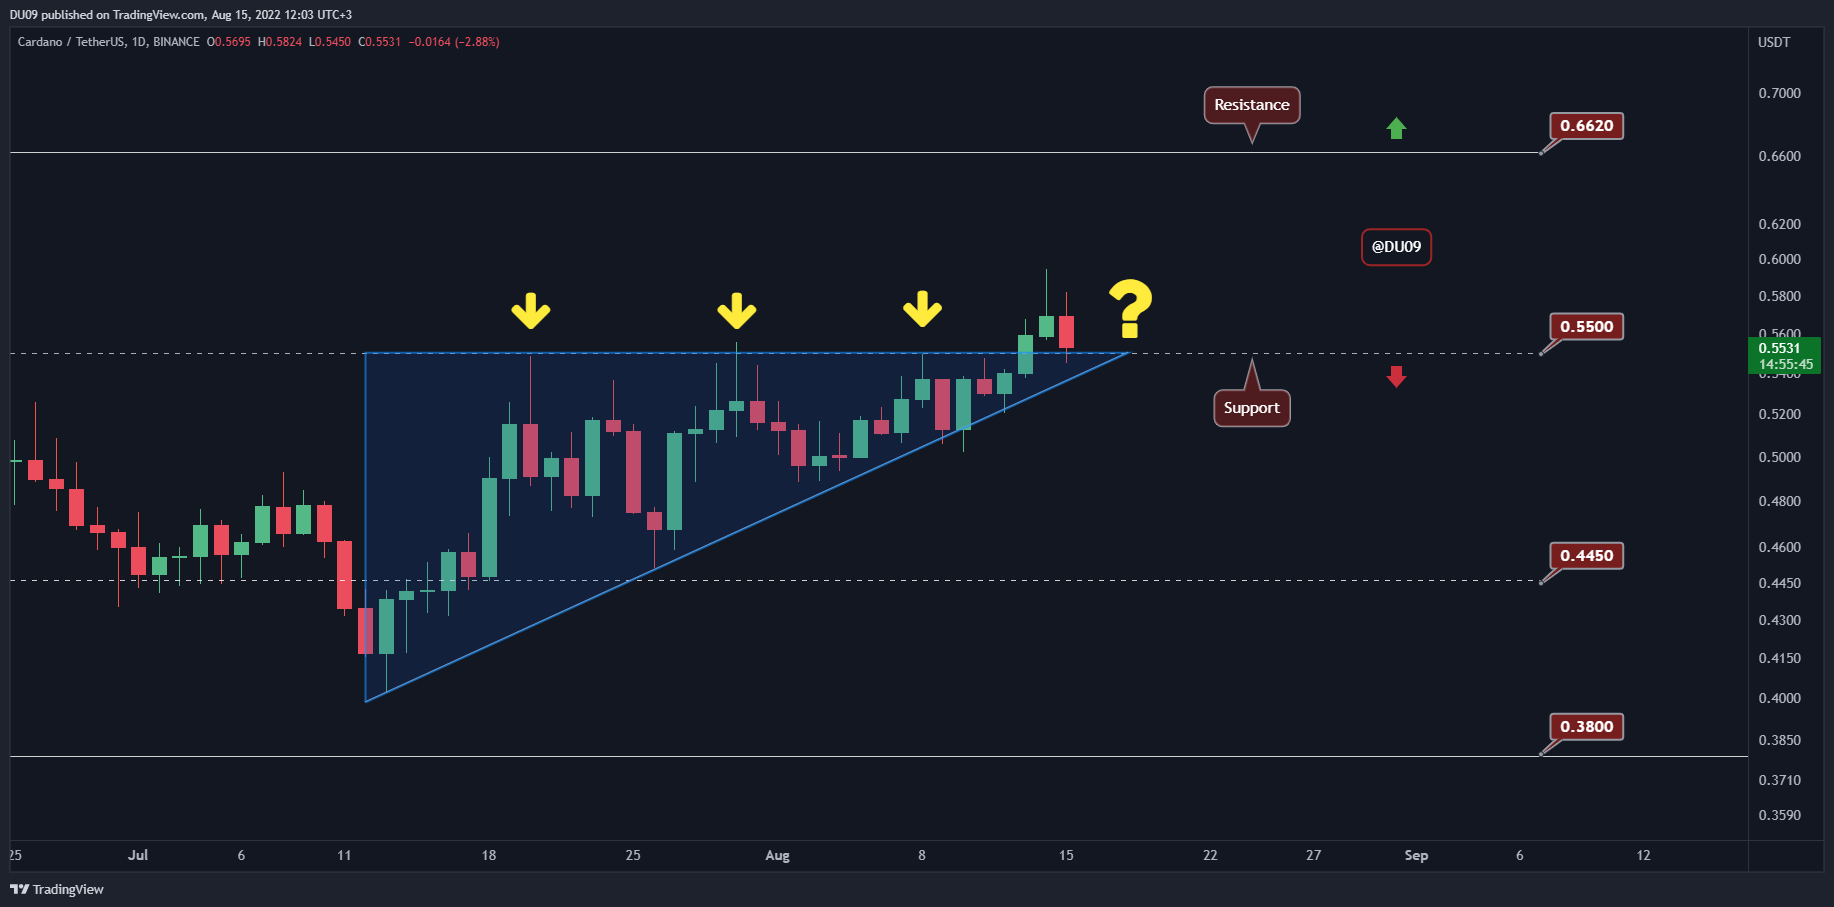 ADA Claims the Critical $0.55 Level But Will Bulls Manage to Defend? (Cardano Price Analysis)